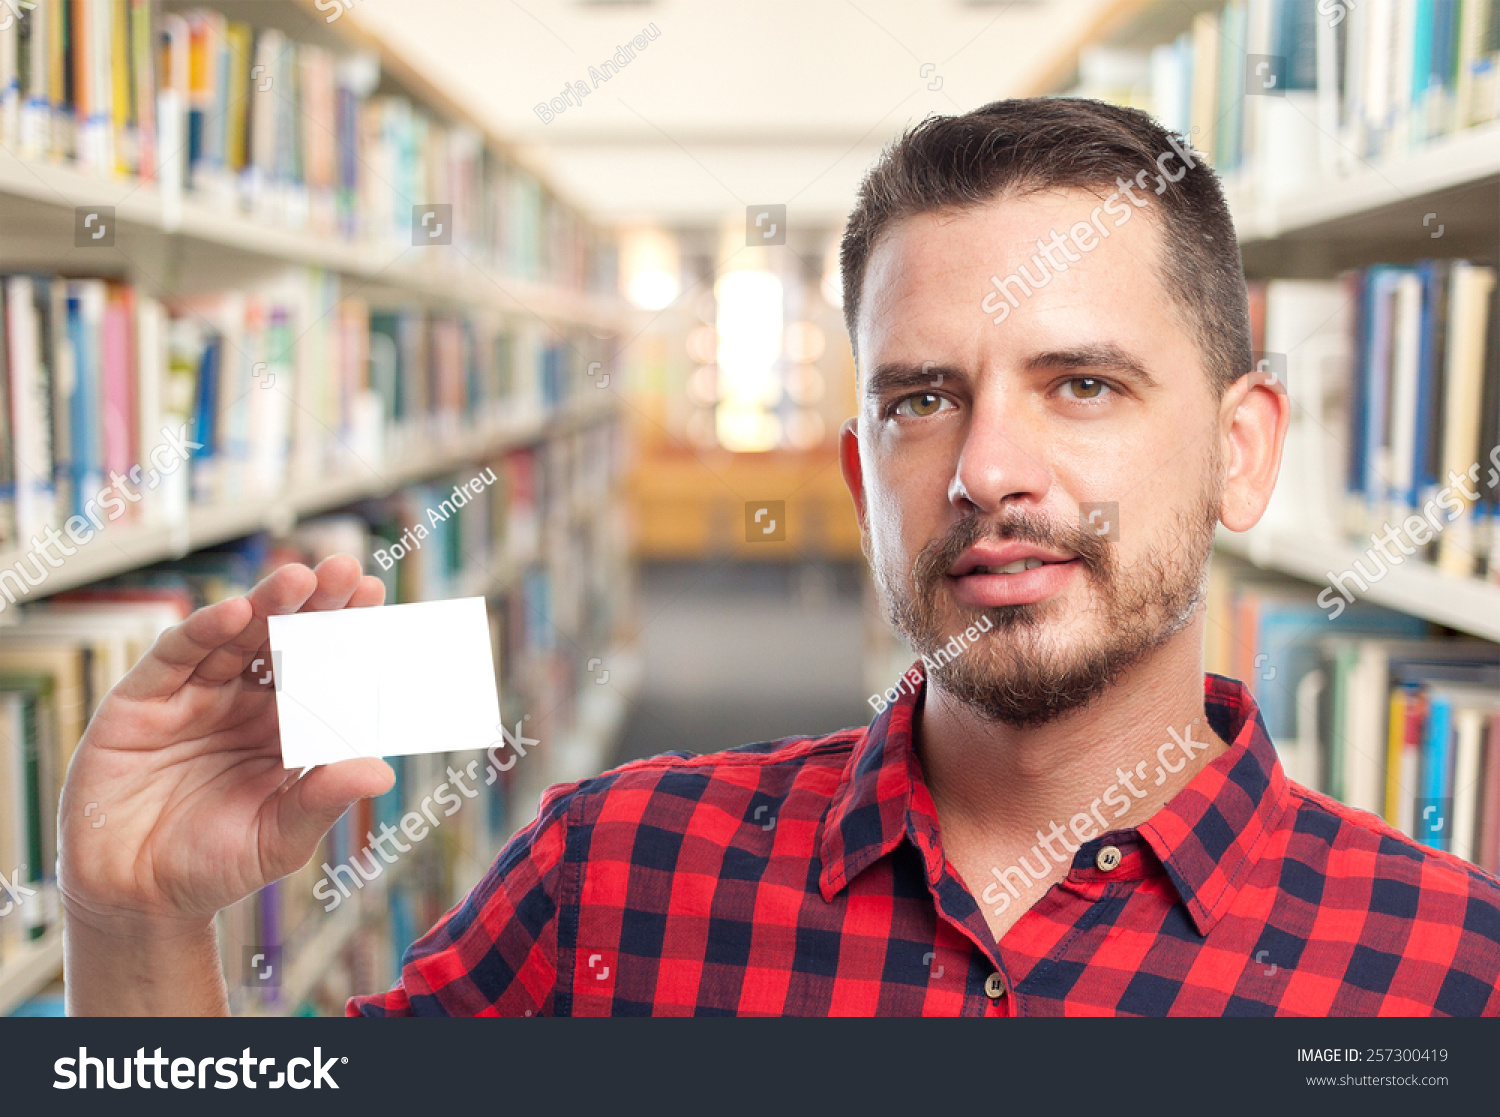 Man with red squares shirt. He is holding a white card. Over library background #257300419